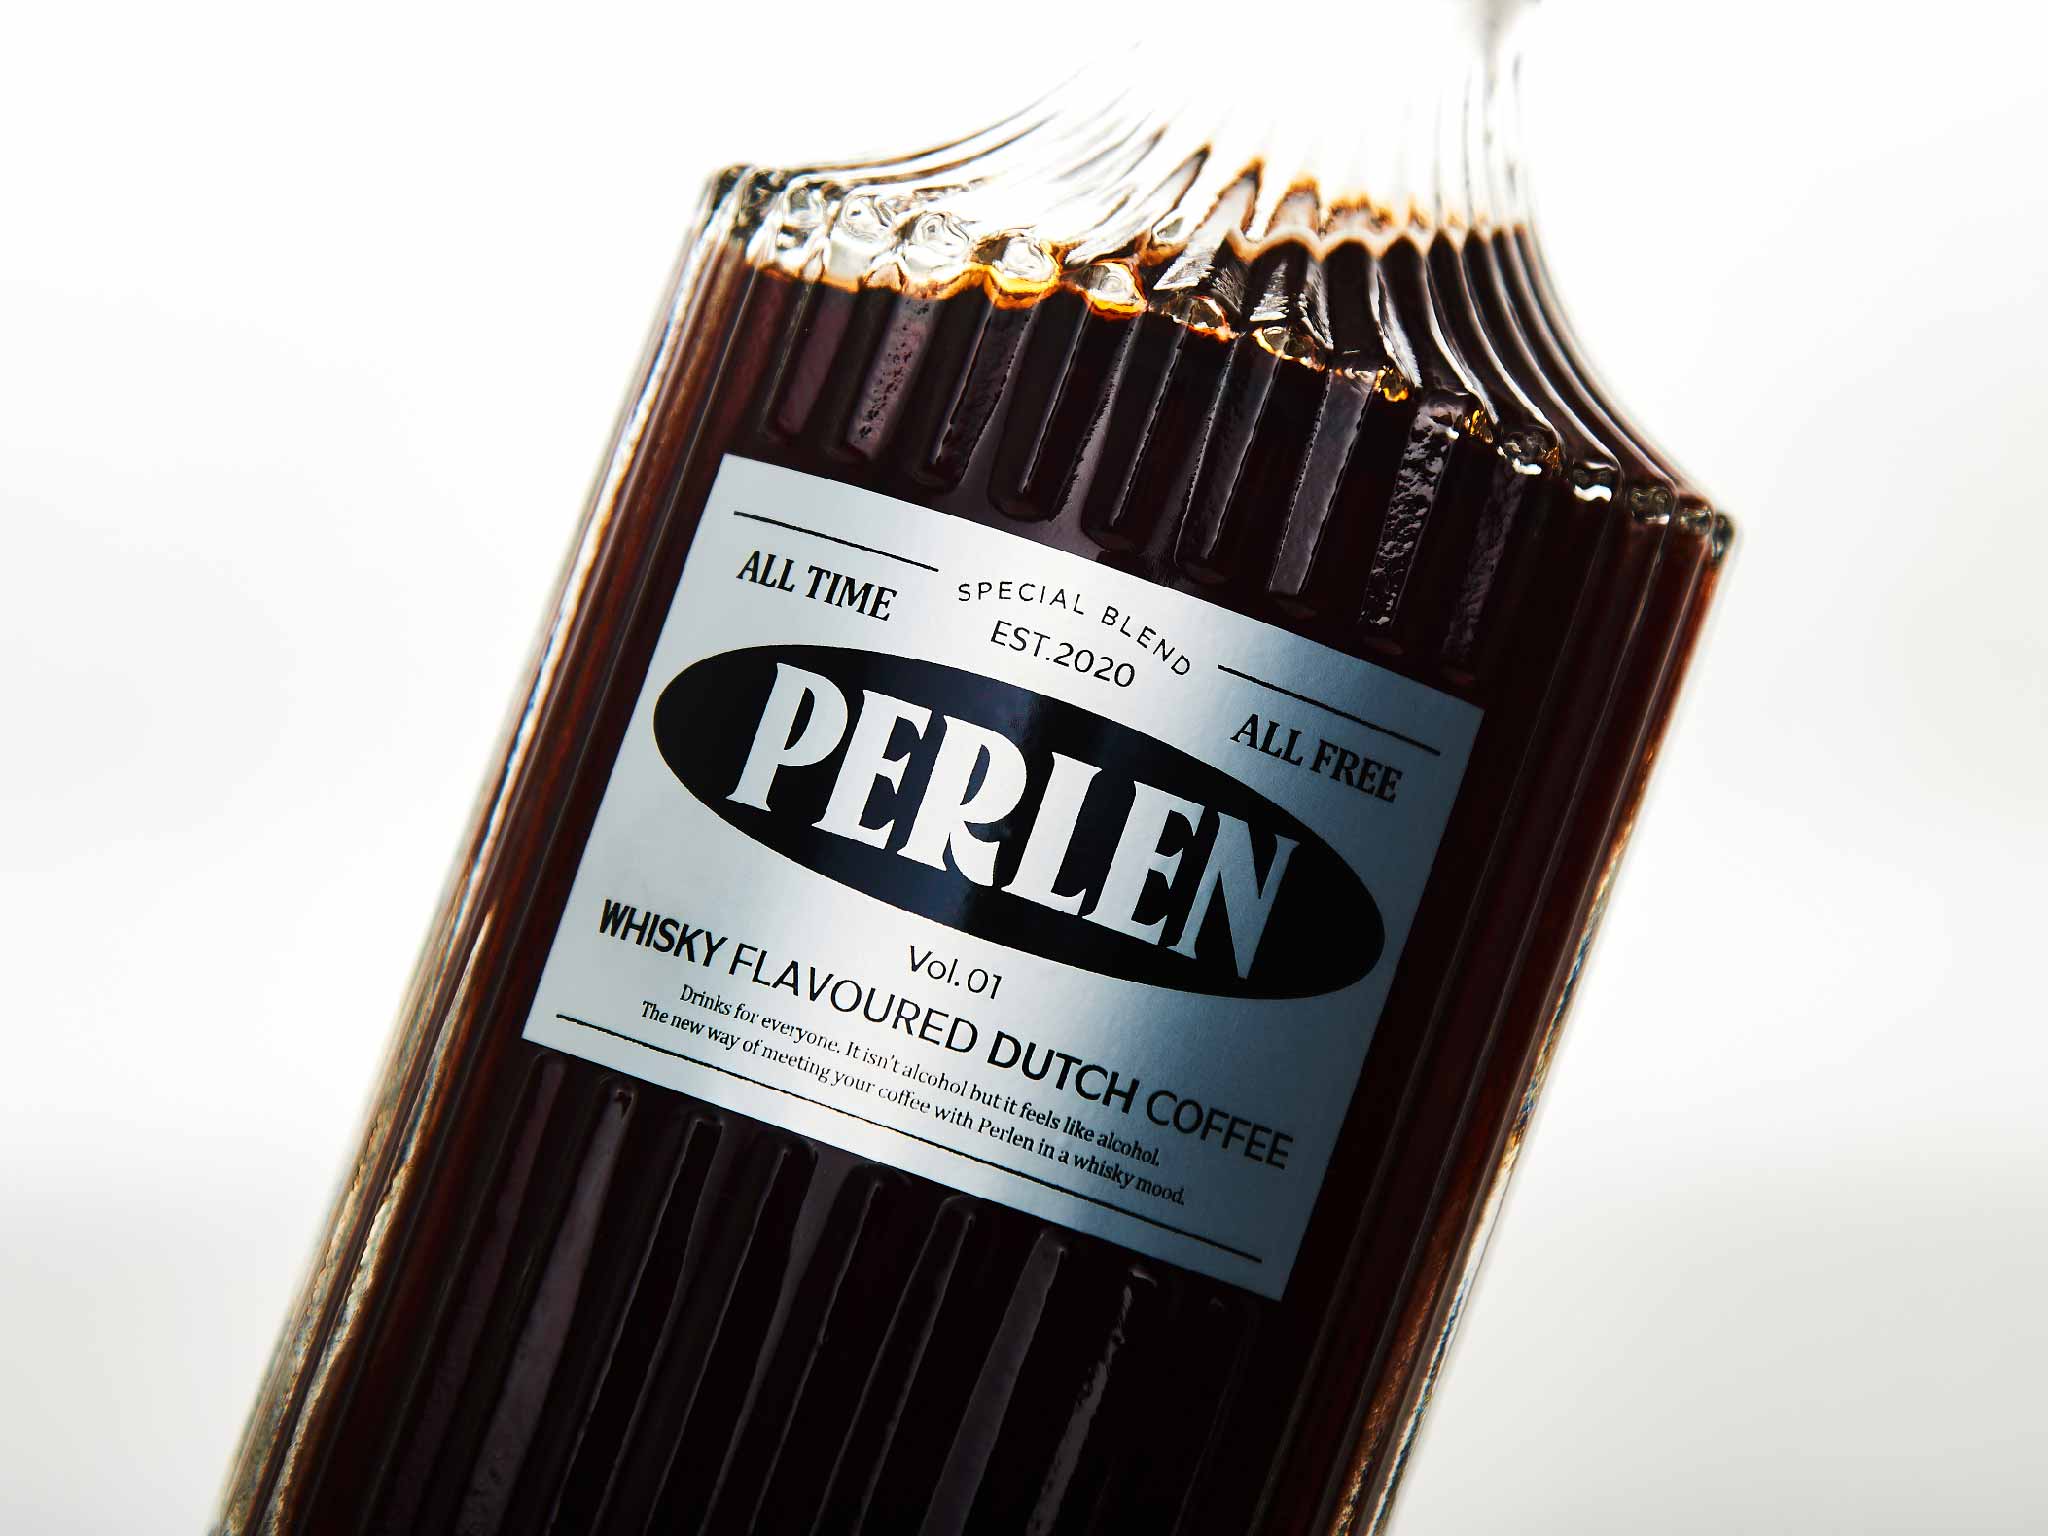 Whisky Flavoured Dutch Coffee from PERLEN